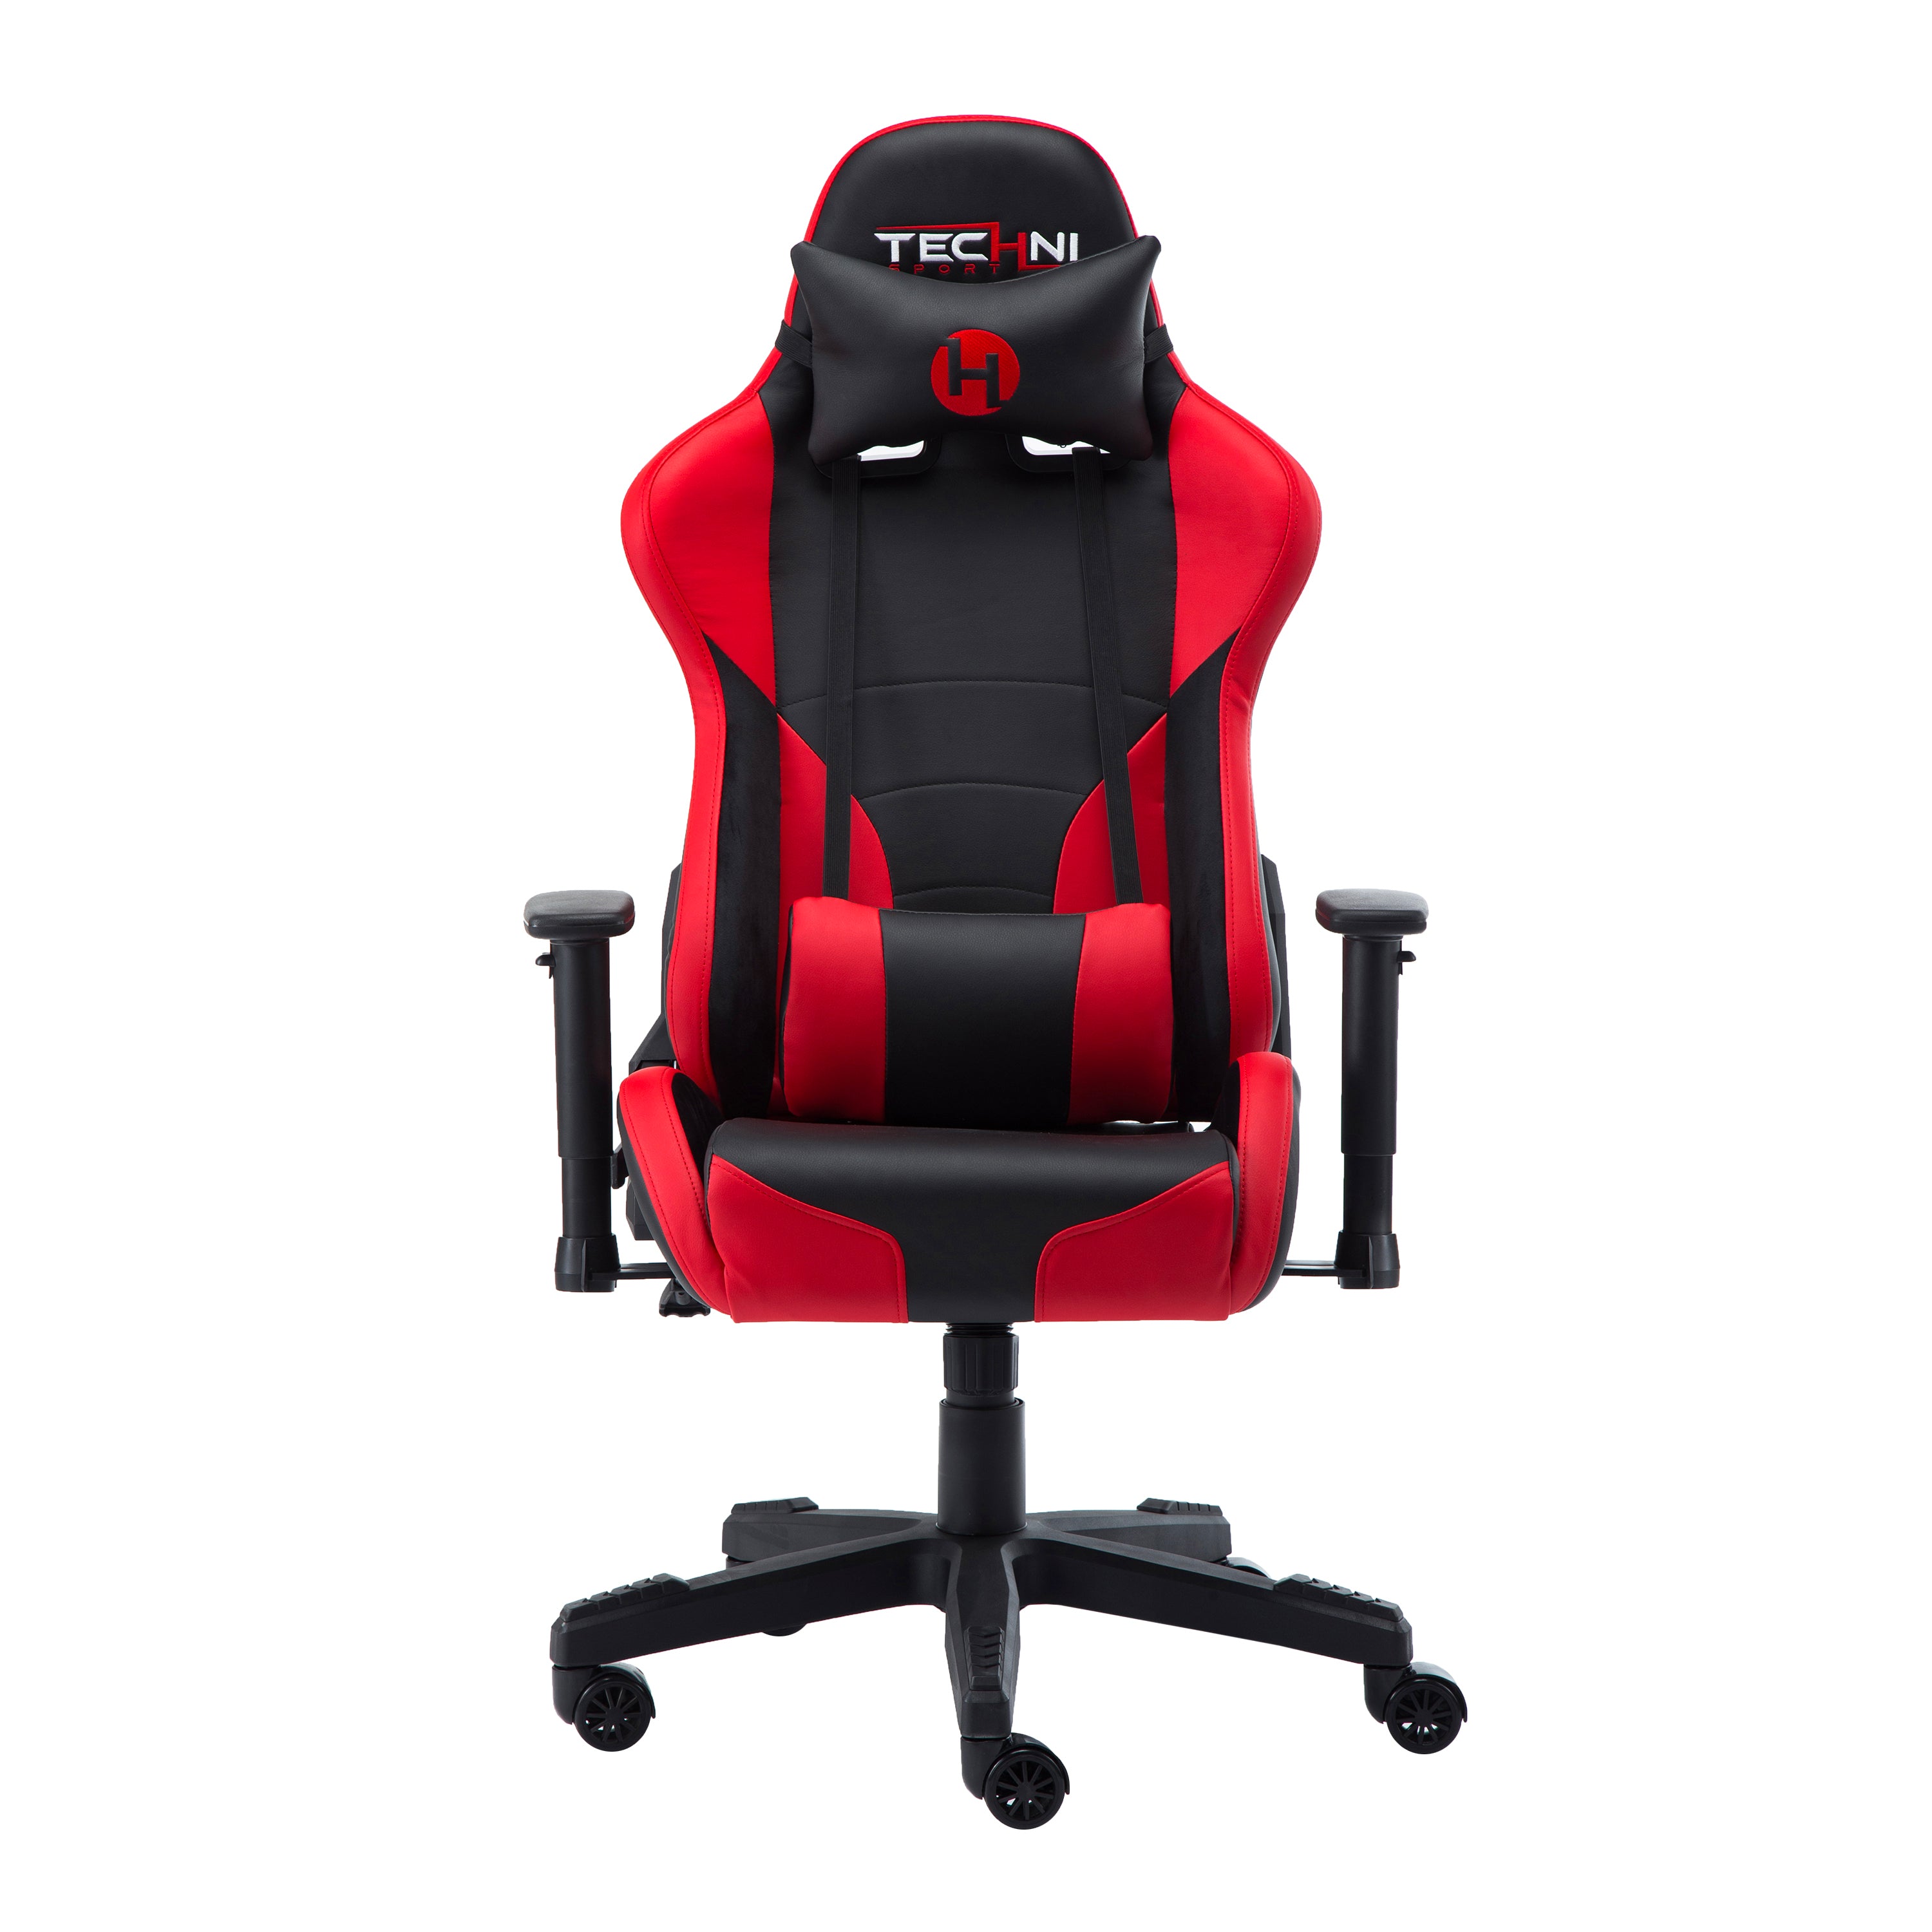 Techni Sport TS-90 Gaming Chair (Red)